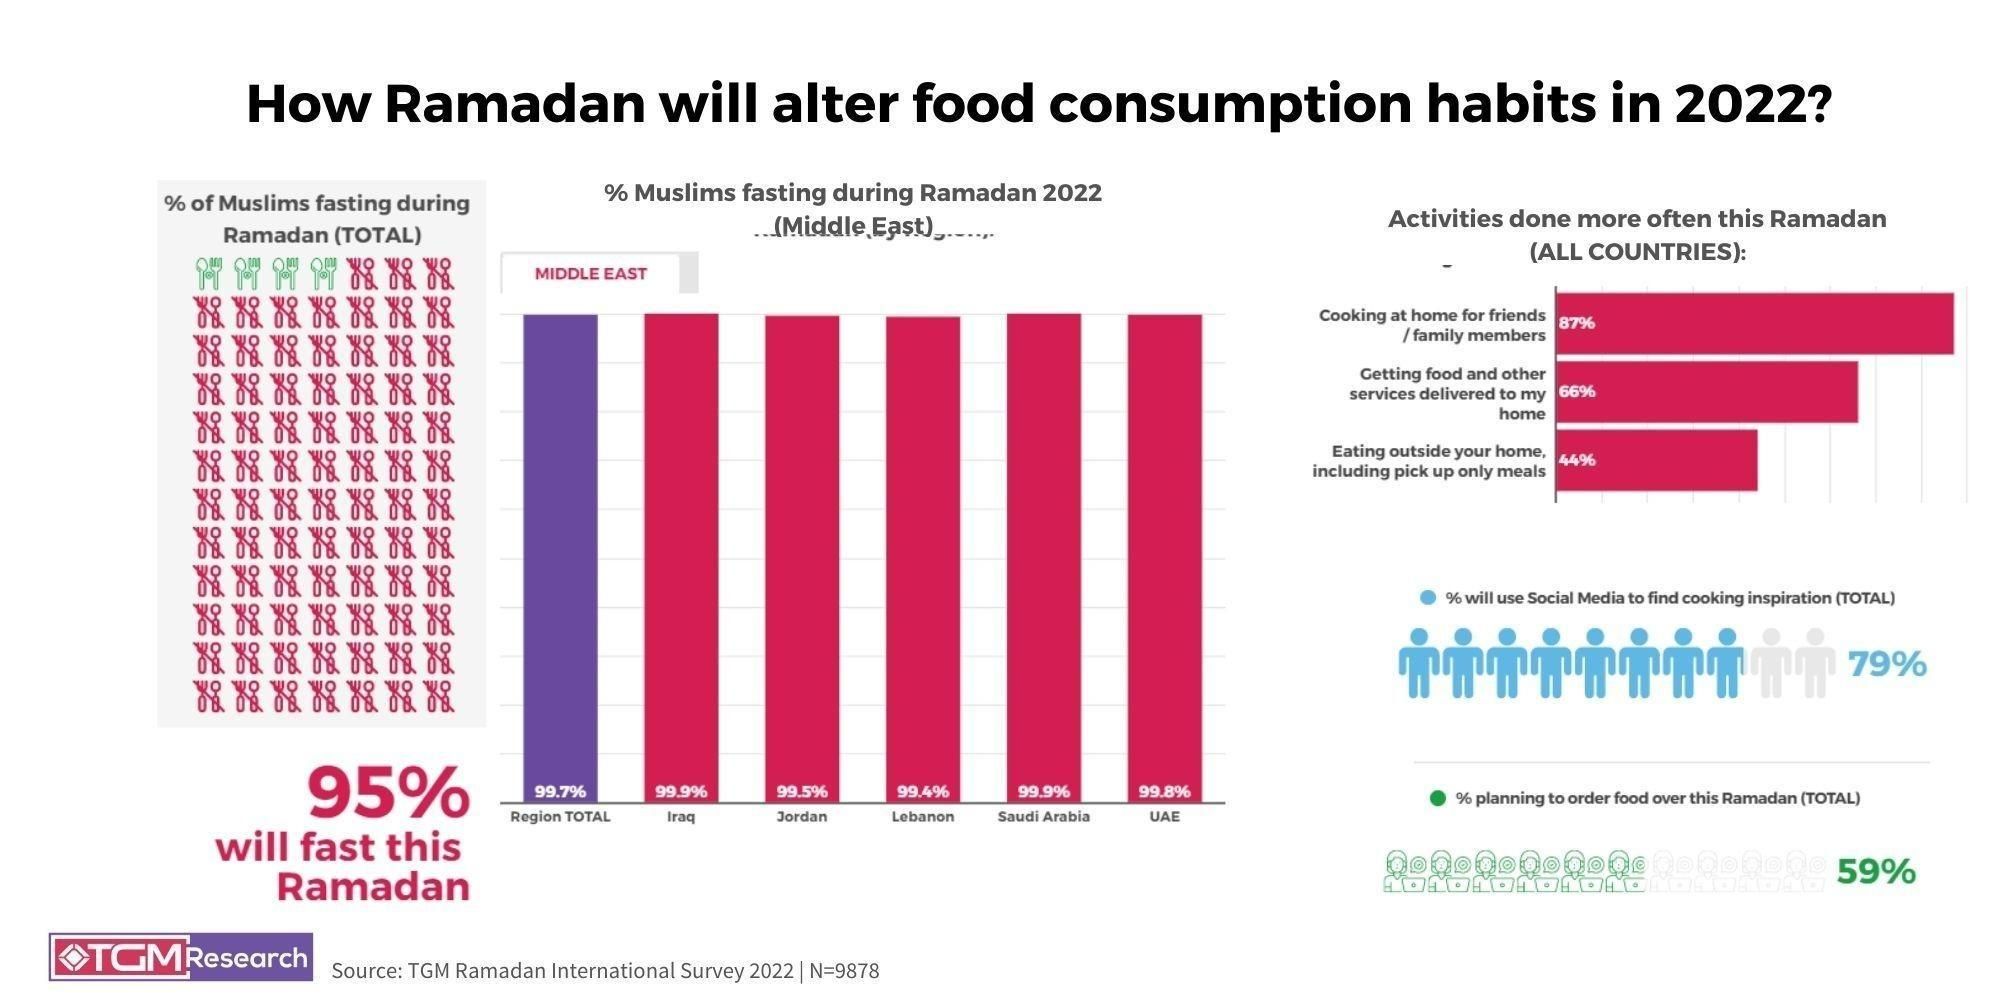 HOW FOOD CONSUMPTION AND SHOPPING OVER 2022 RAMADAN WILL DIFFER?